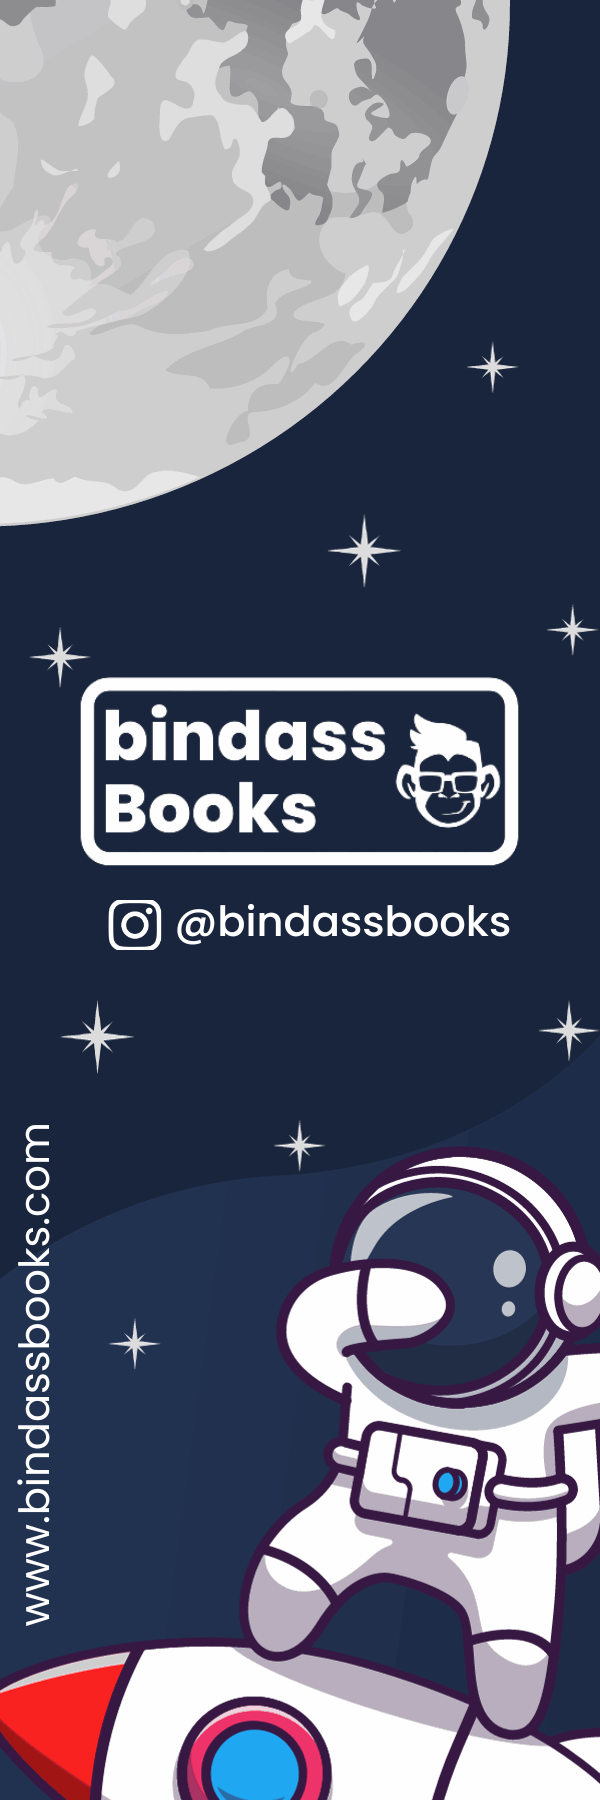 Bindass Books Exclusive Bookmarks Pack of 4